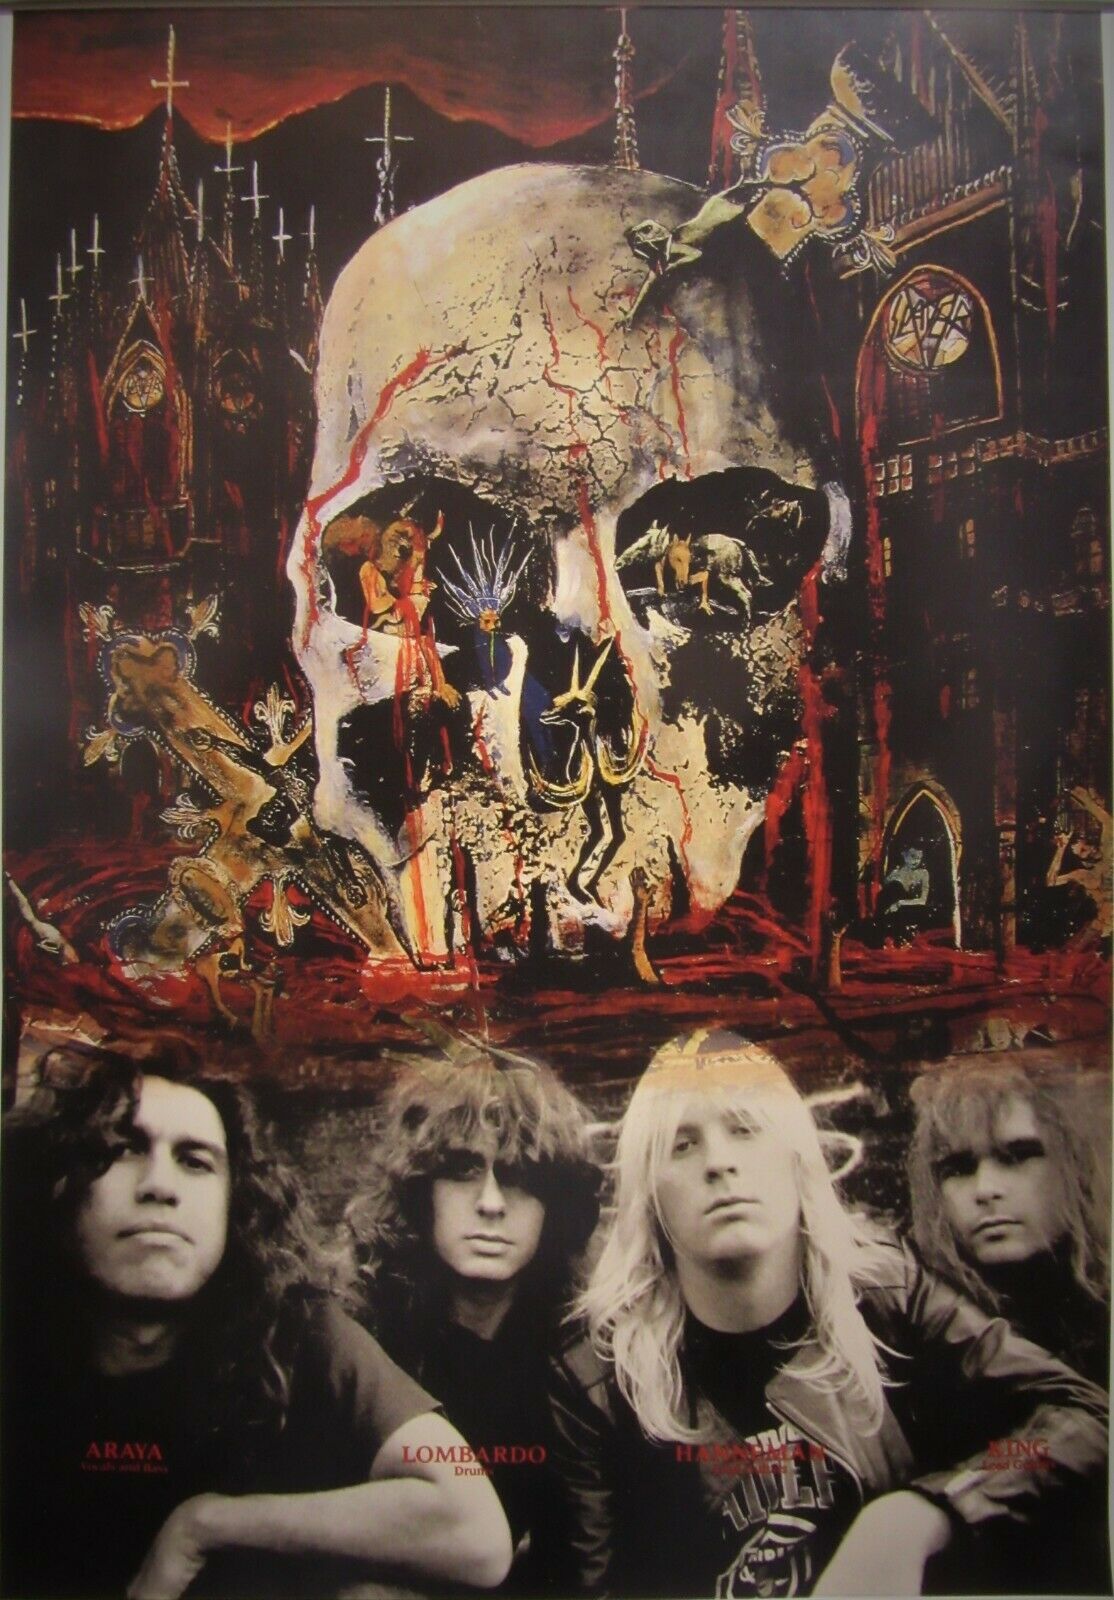 Slayer  `south Of Heaven` Poster  27x19in (68x48cm)